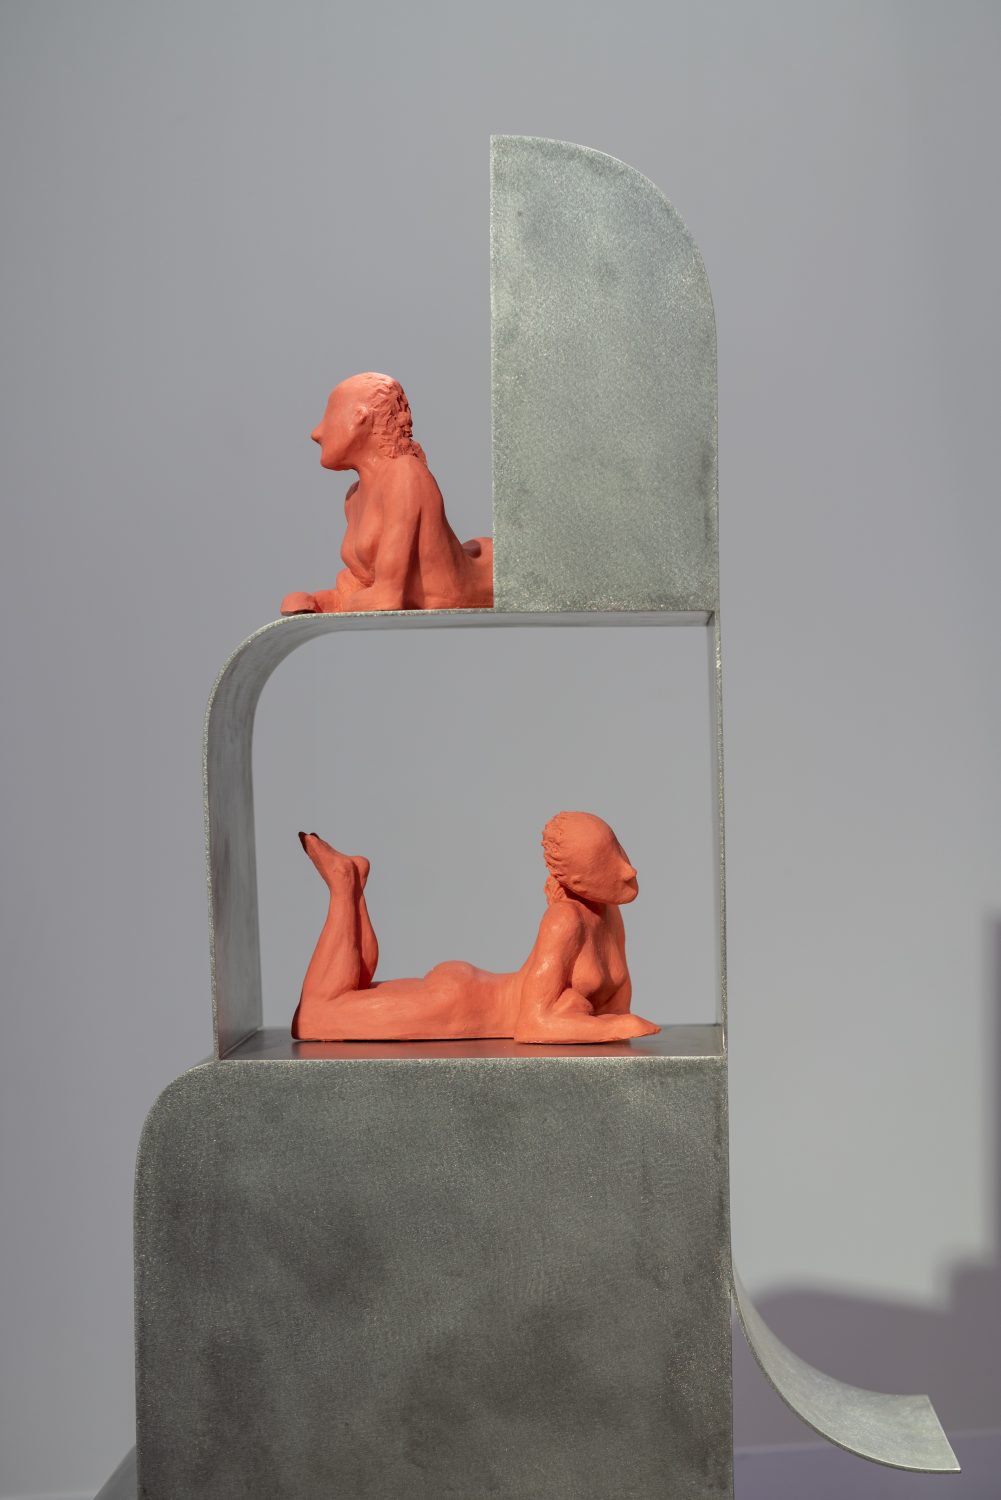 Lena HenkeOur Only One57, (Female Fatigue Series), 2019Steel, rubber, sand136 x 68 x 32 cm